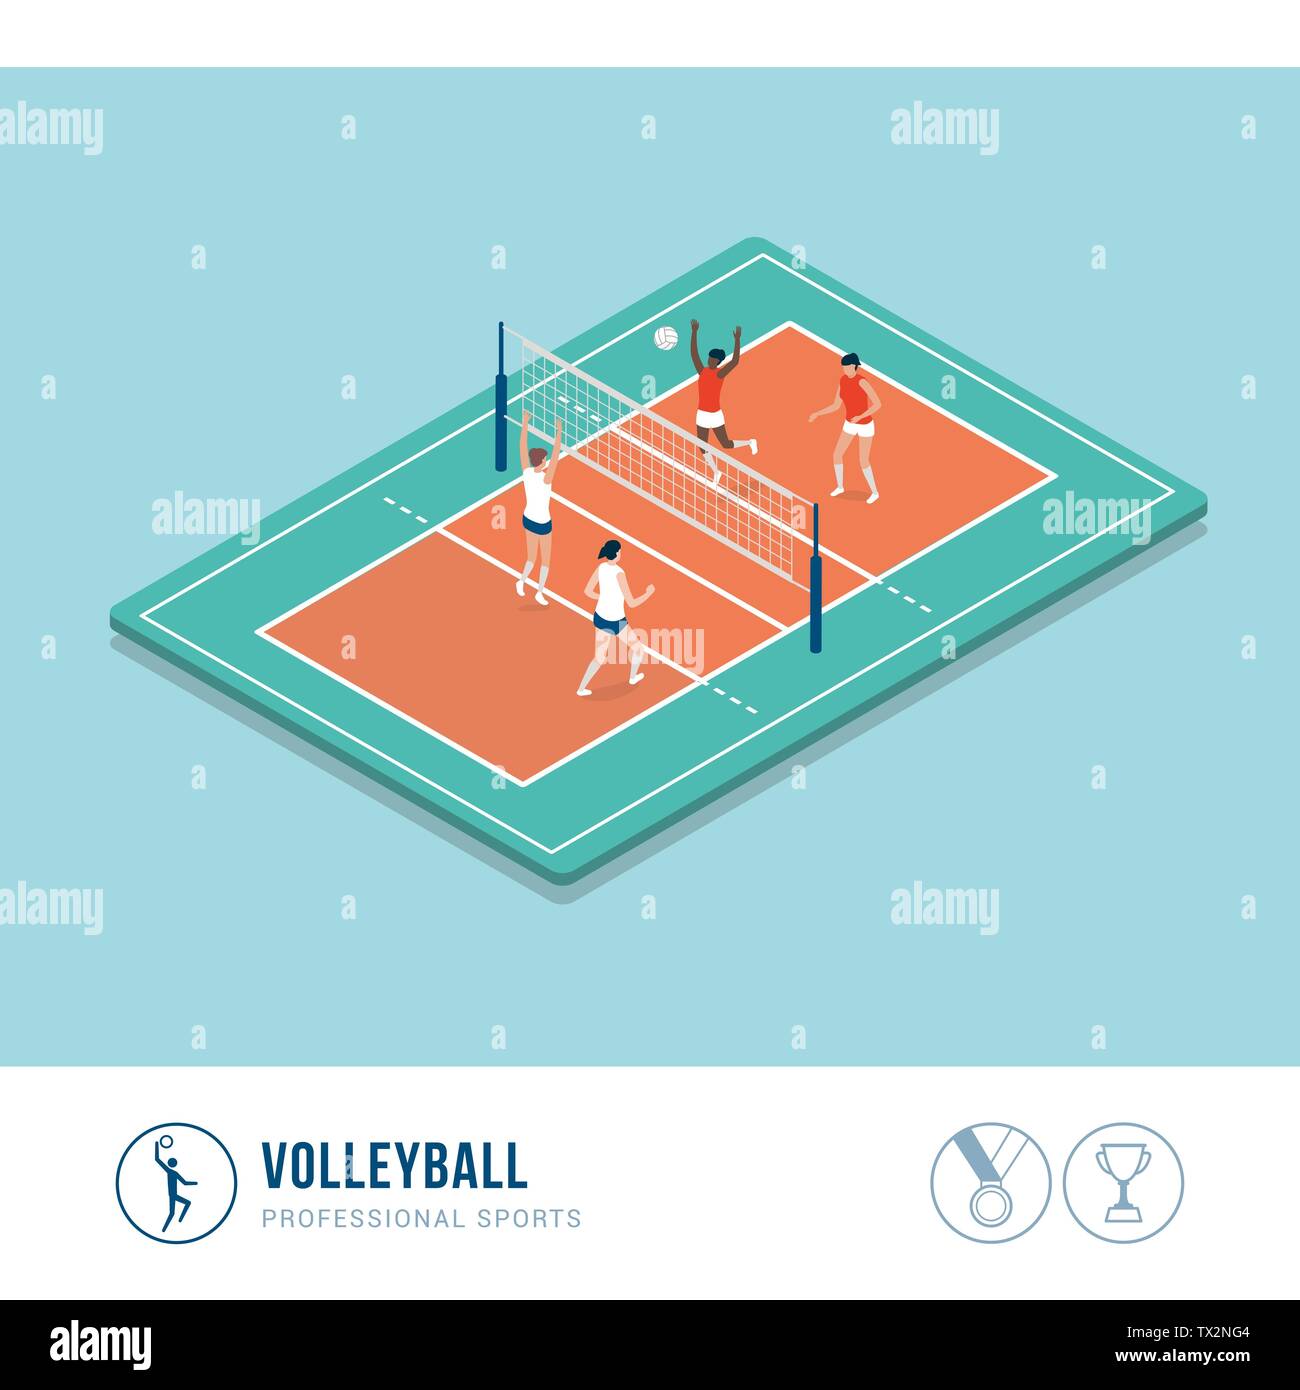 Professional sports competition: volleyball match with female players Stock Vector